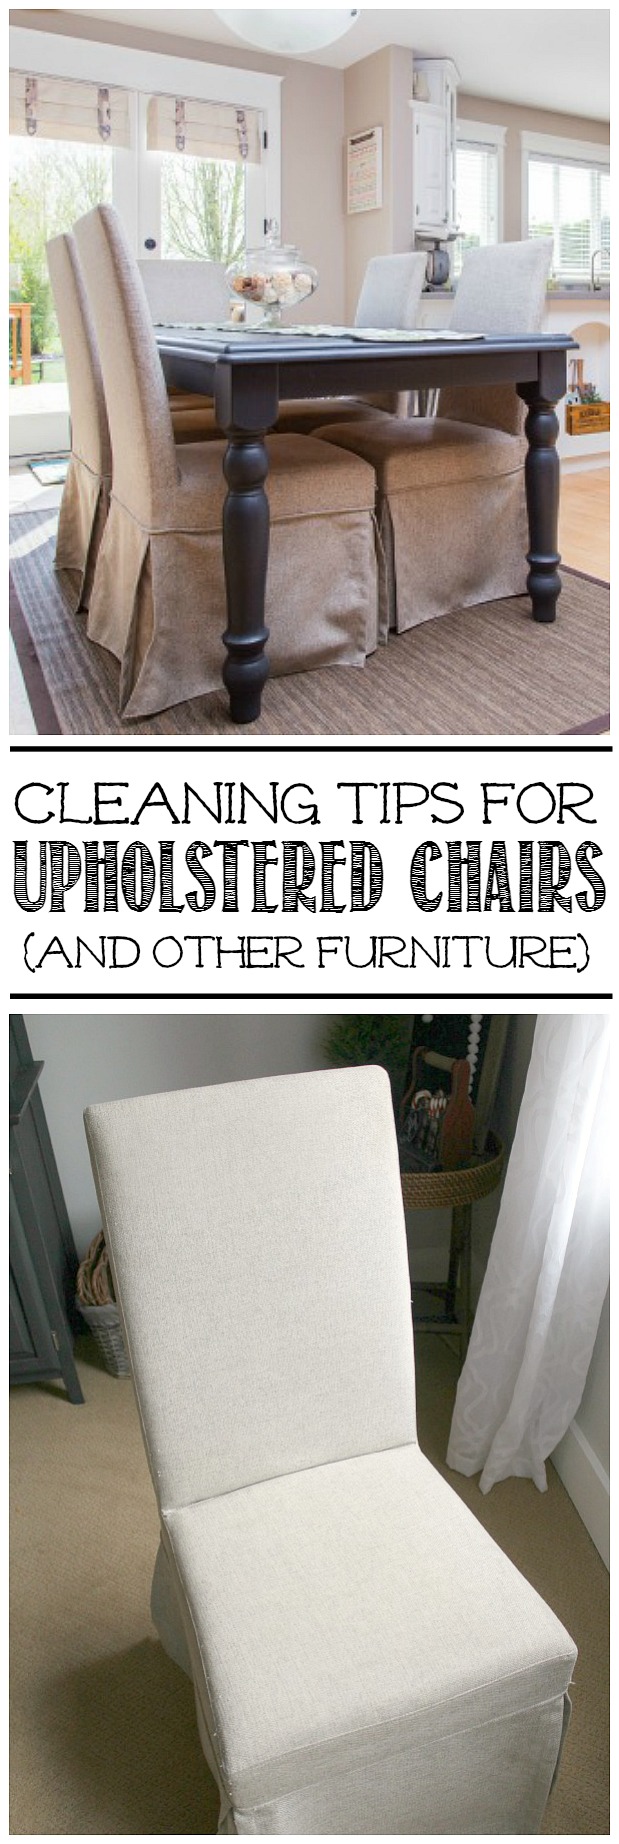 How To Clean Upholstered Chairs, How Do I Clean My Fabric Chairs